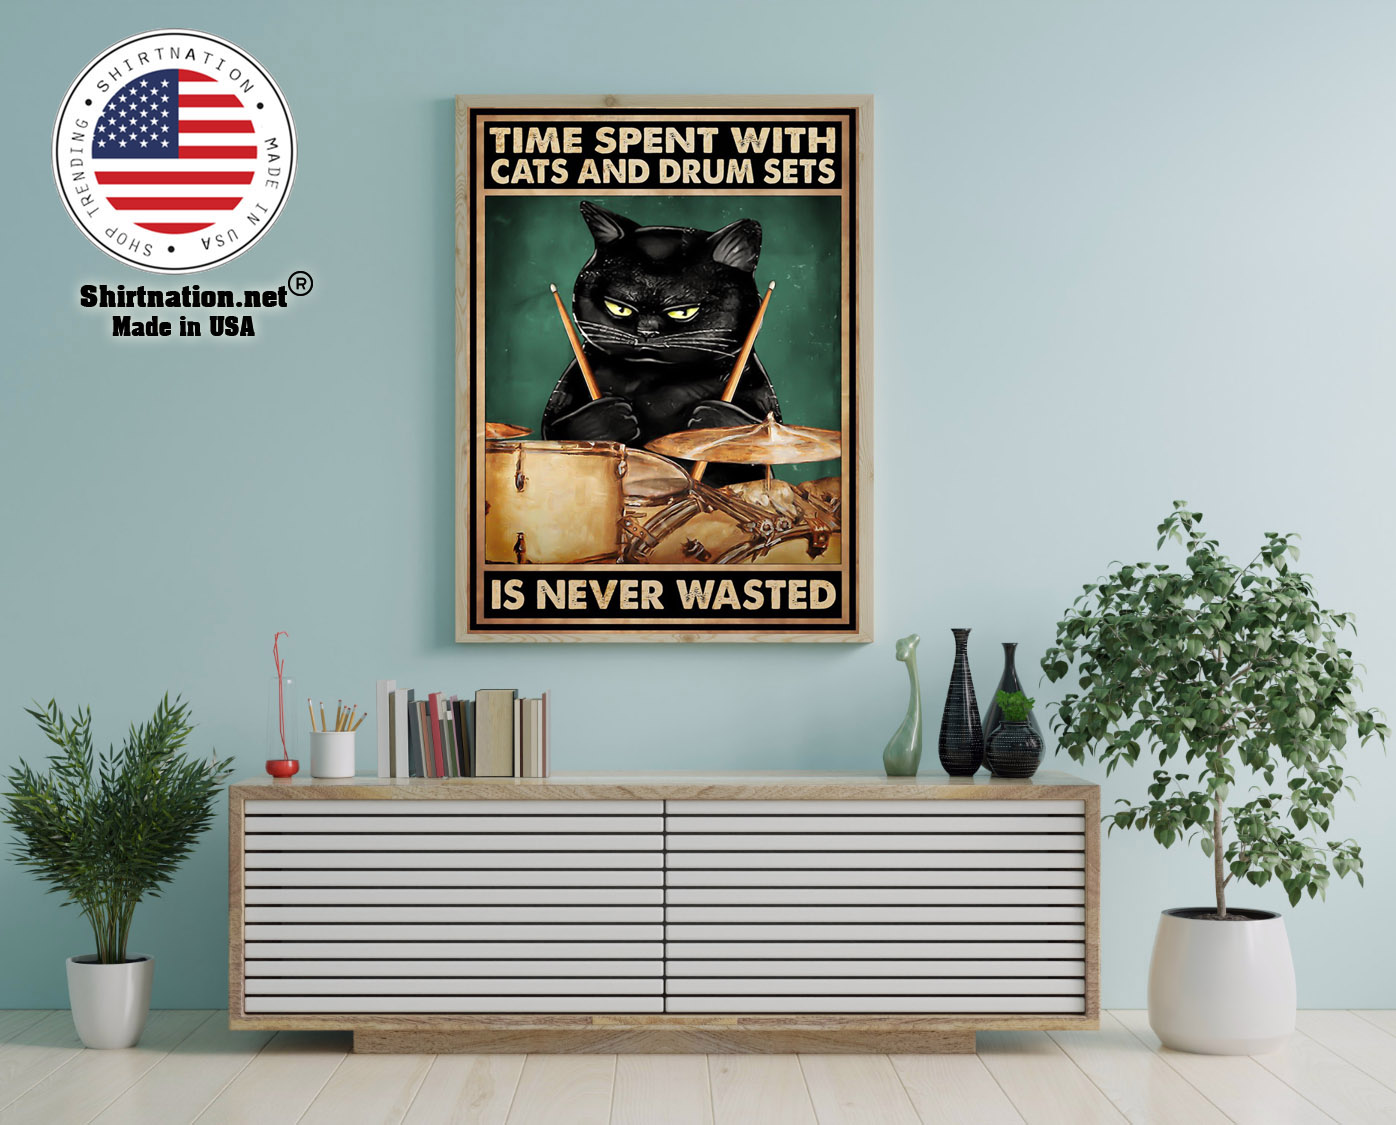 Time spent with cats and drum sets is never wasted poster 16